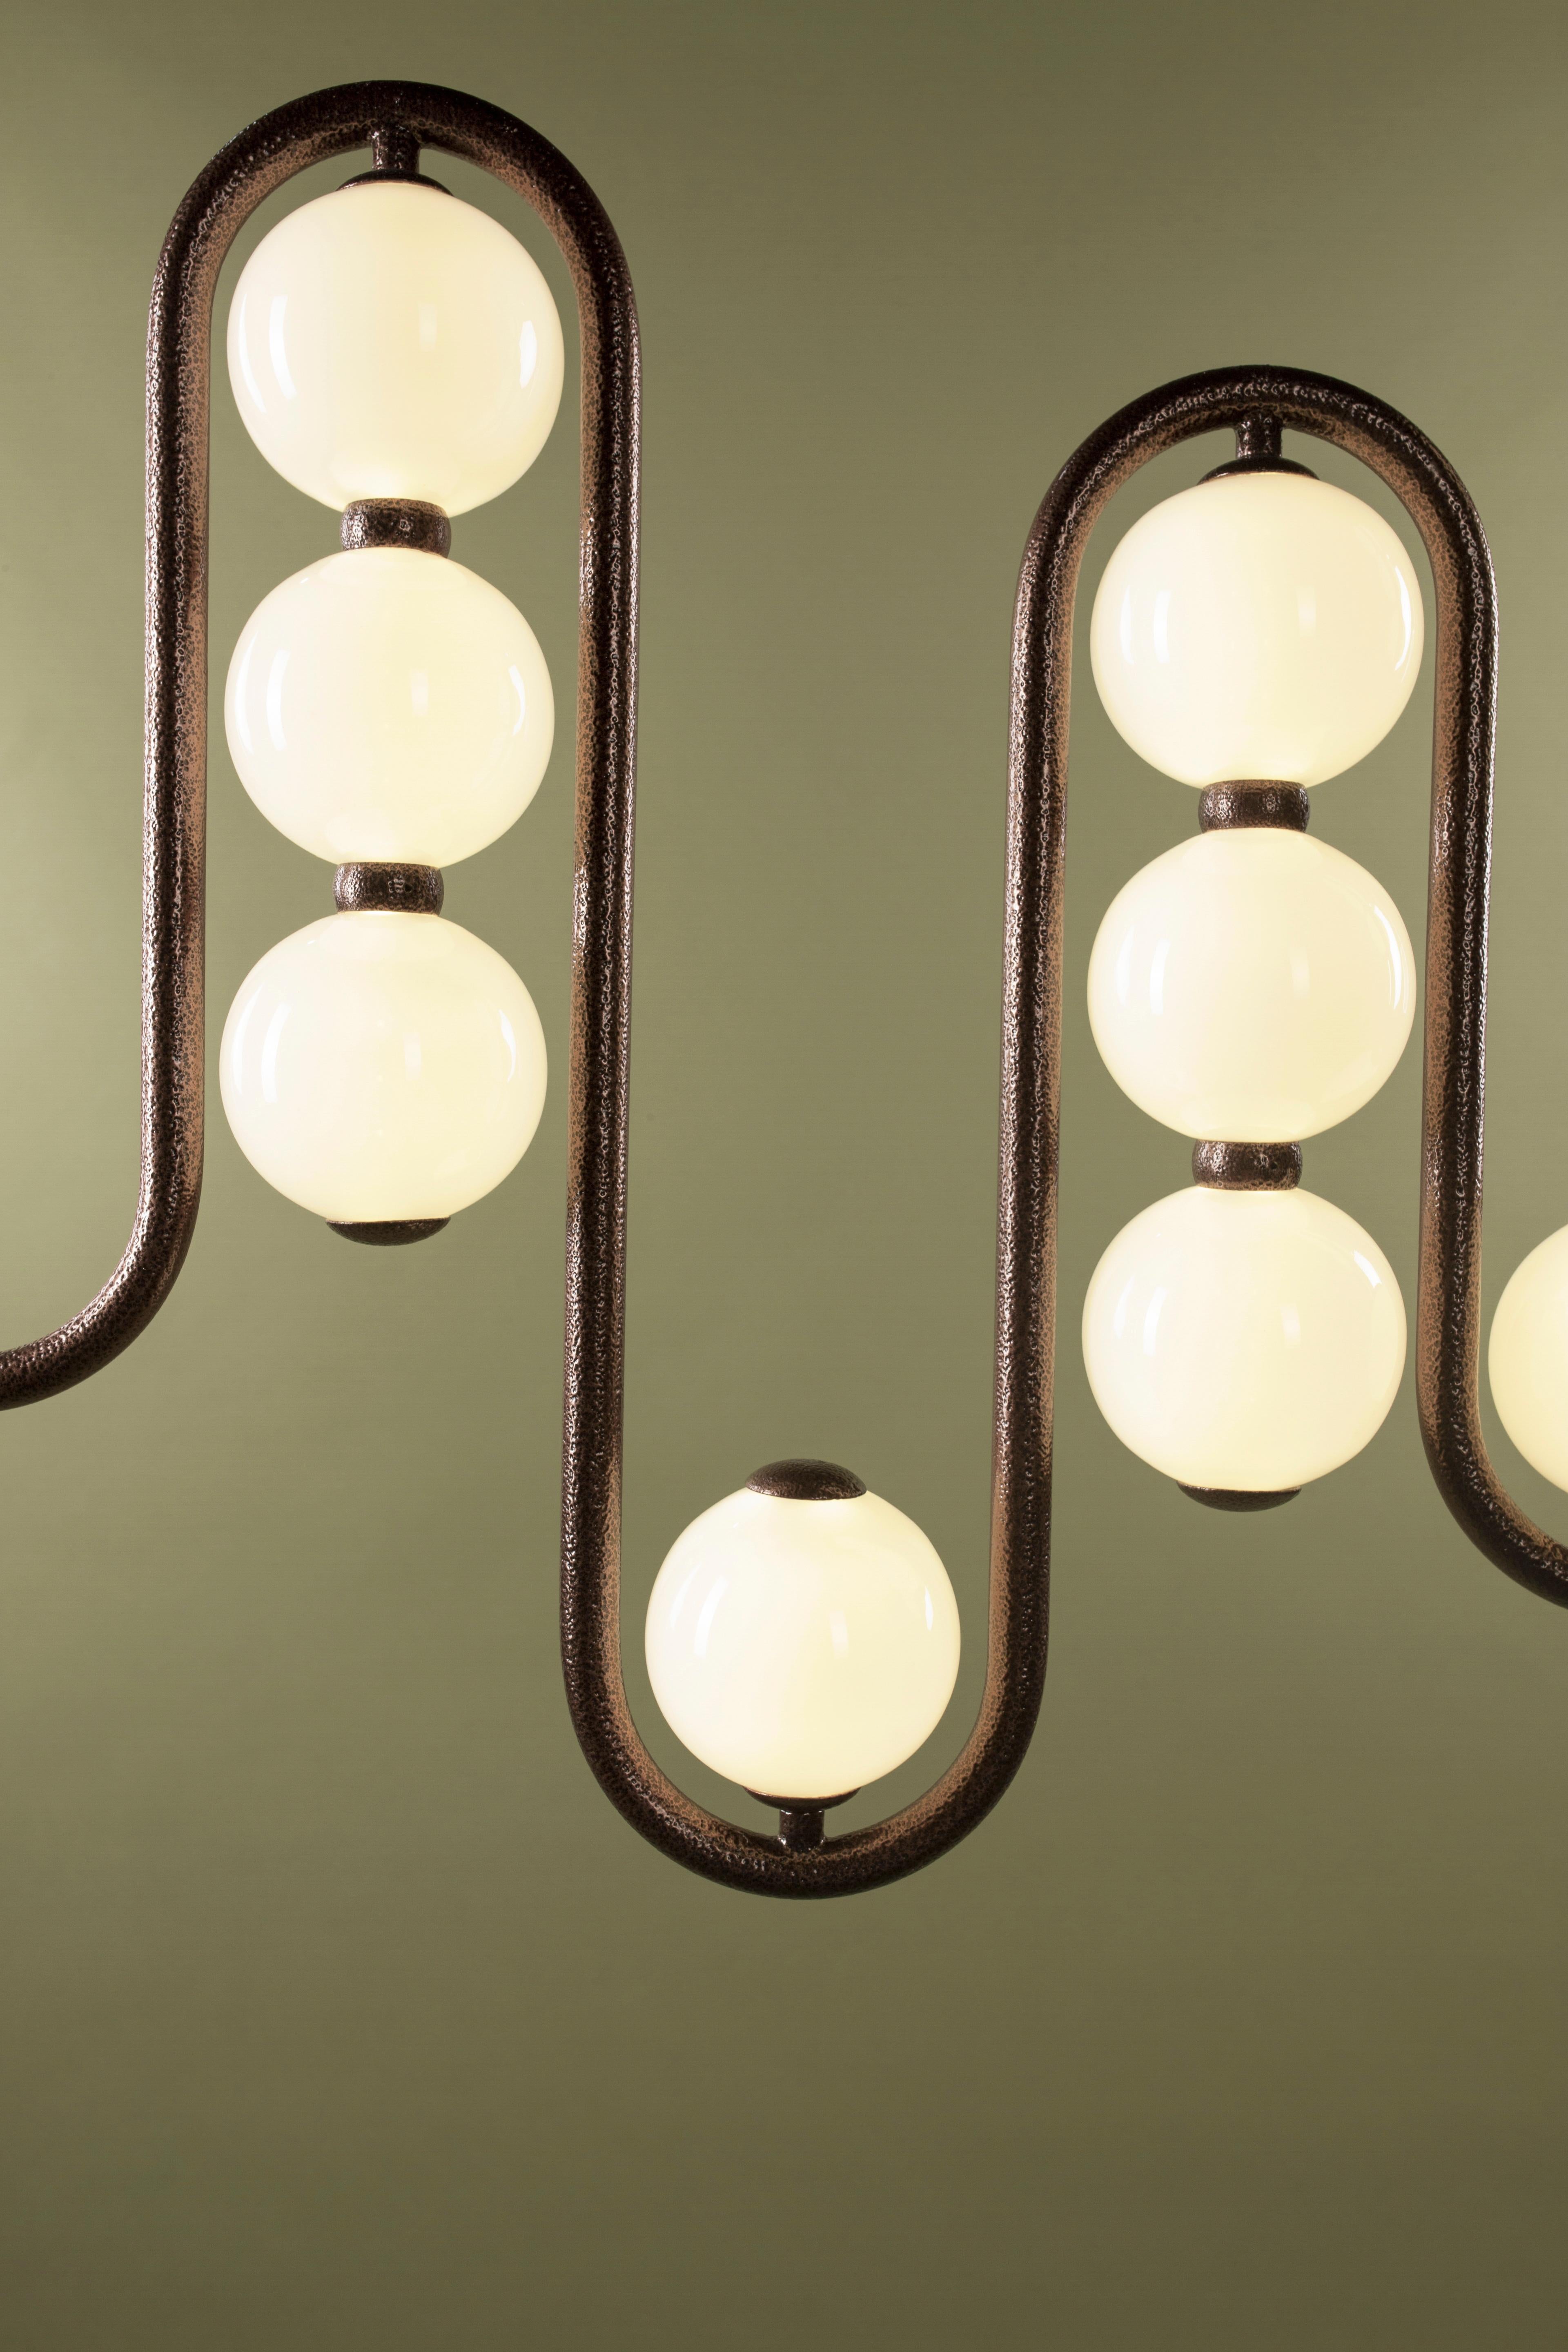 Sleek metal frames, industrially produced in true Bauhaus style, form the language of this lighting collection. The series is very versatile, can be customised to required formats and available in custom finishes. For custom proposals we request